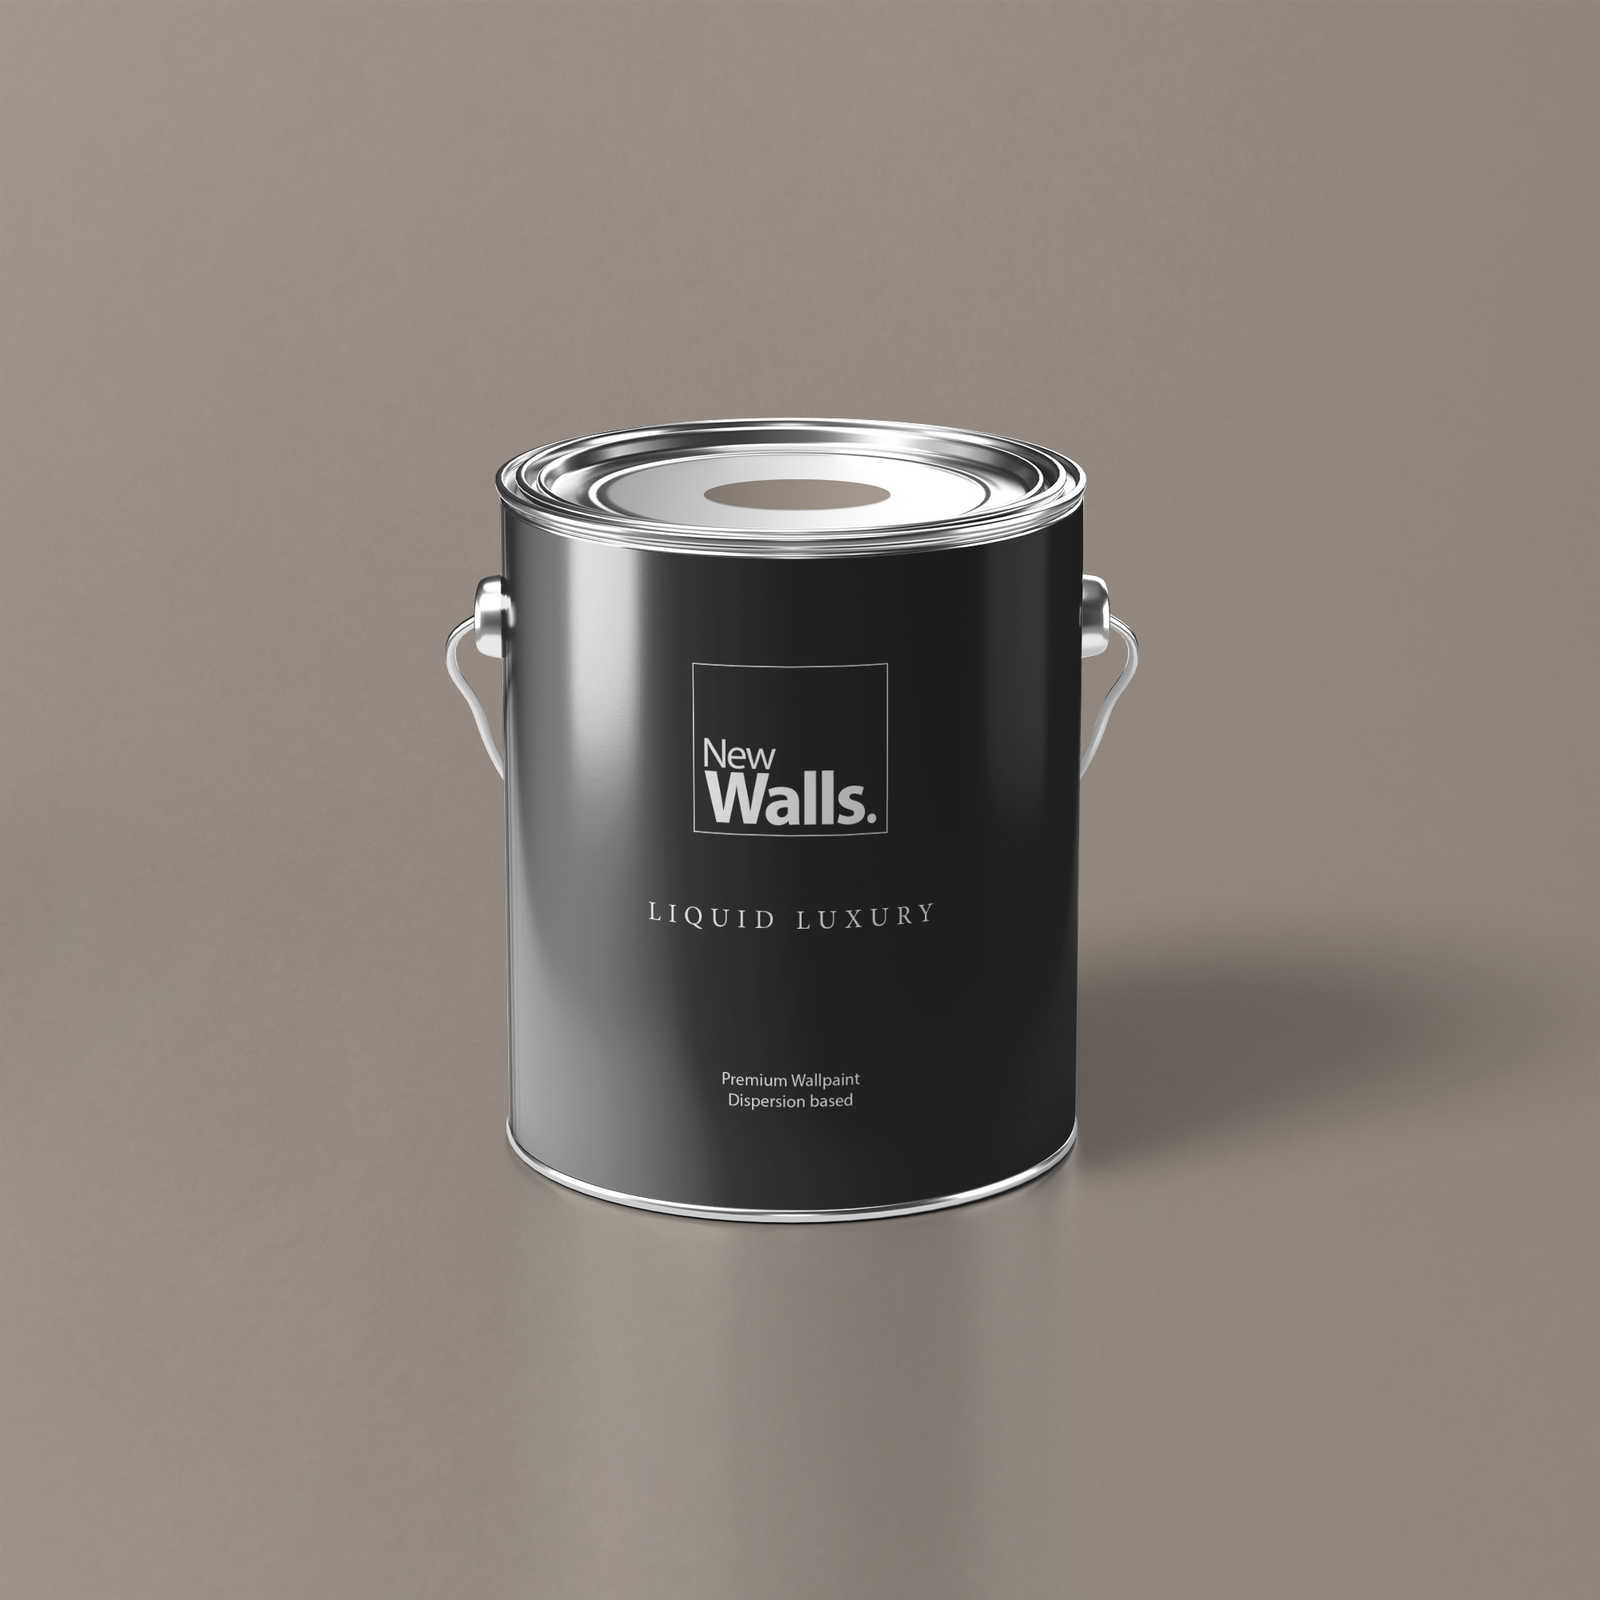 Premium Wall Paint Balanced Taupe »Talented calm taupe« NW701 – 5 litre
